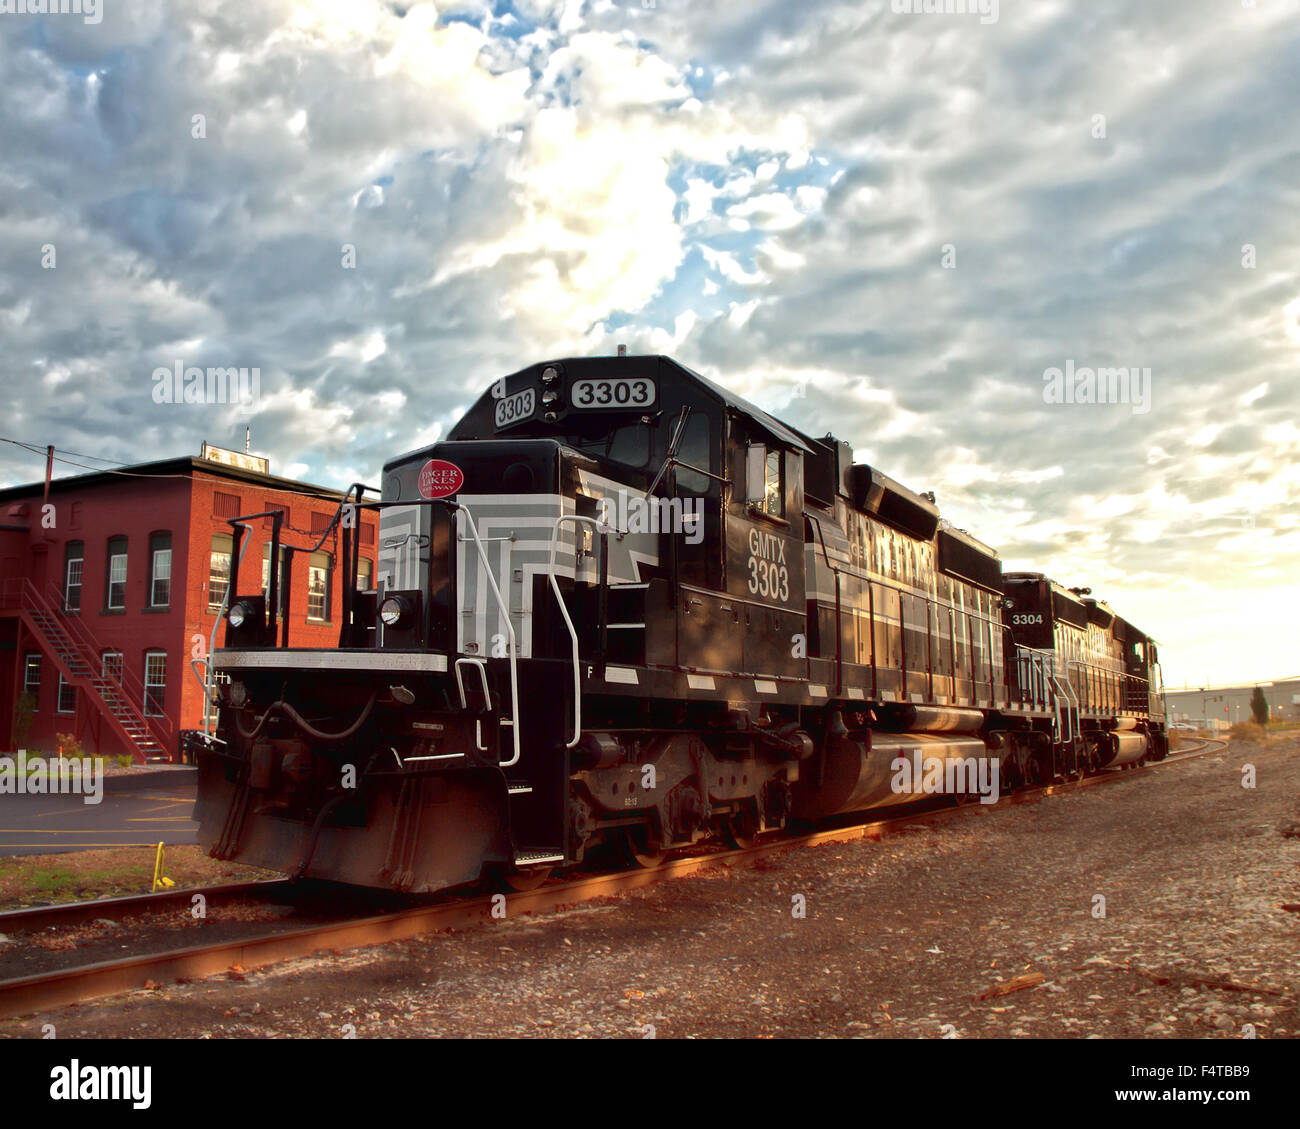 Solvay, New York, USA. October, 22,2015. The Fingerlakes Railway locomotive parked on the railway tracks in front of Chinatown Stock Photo